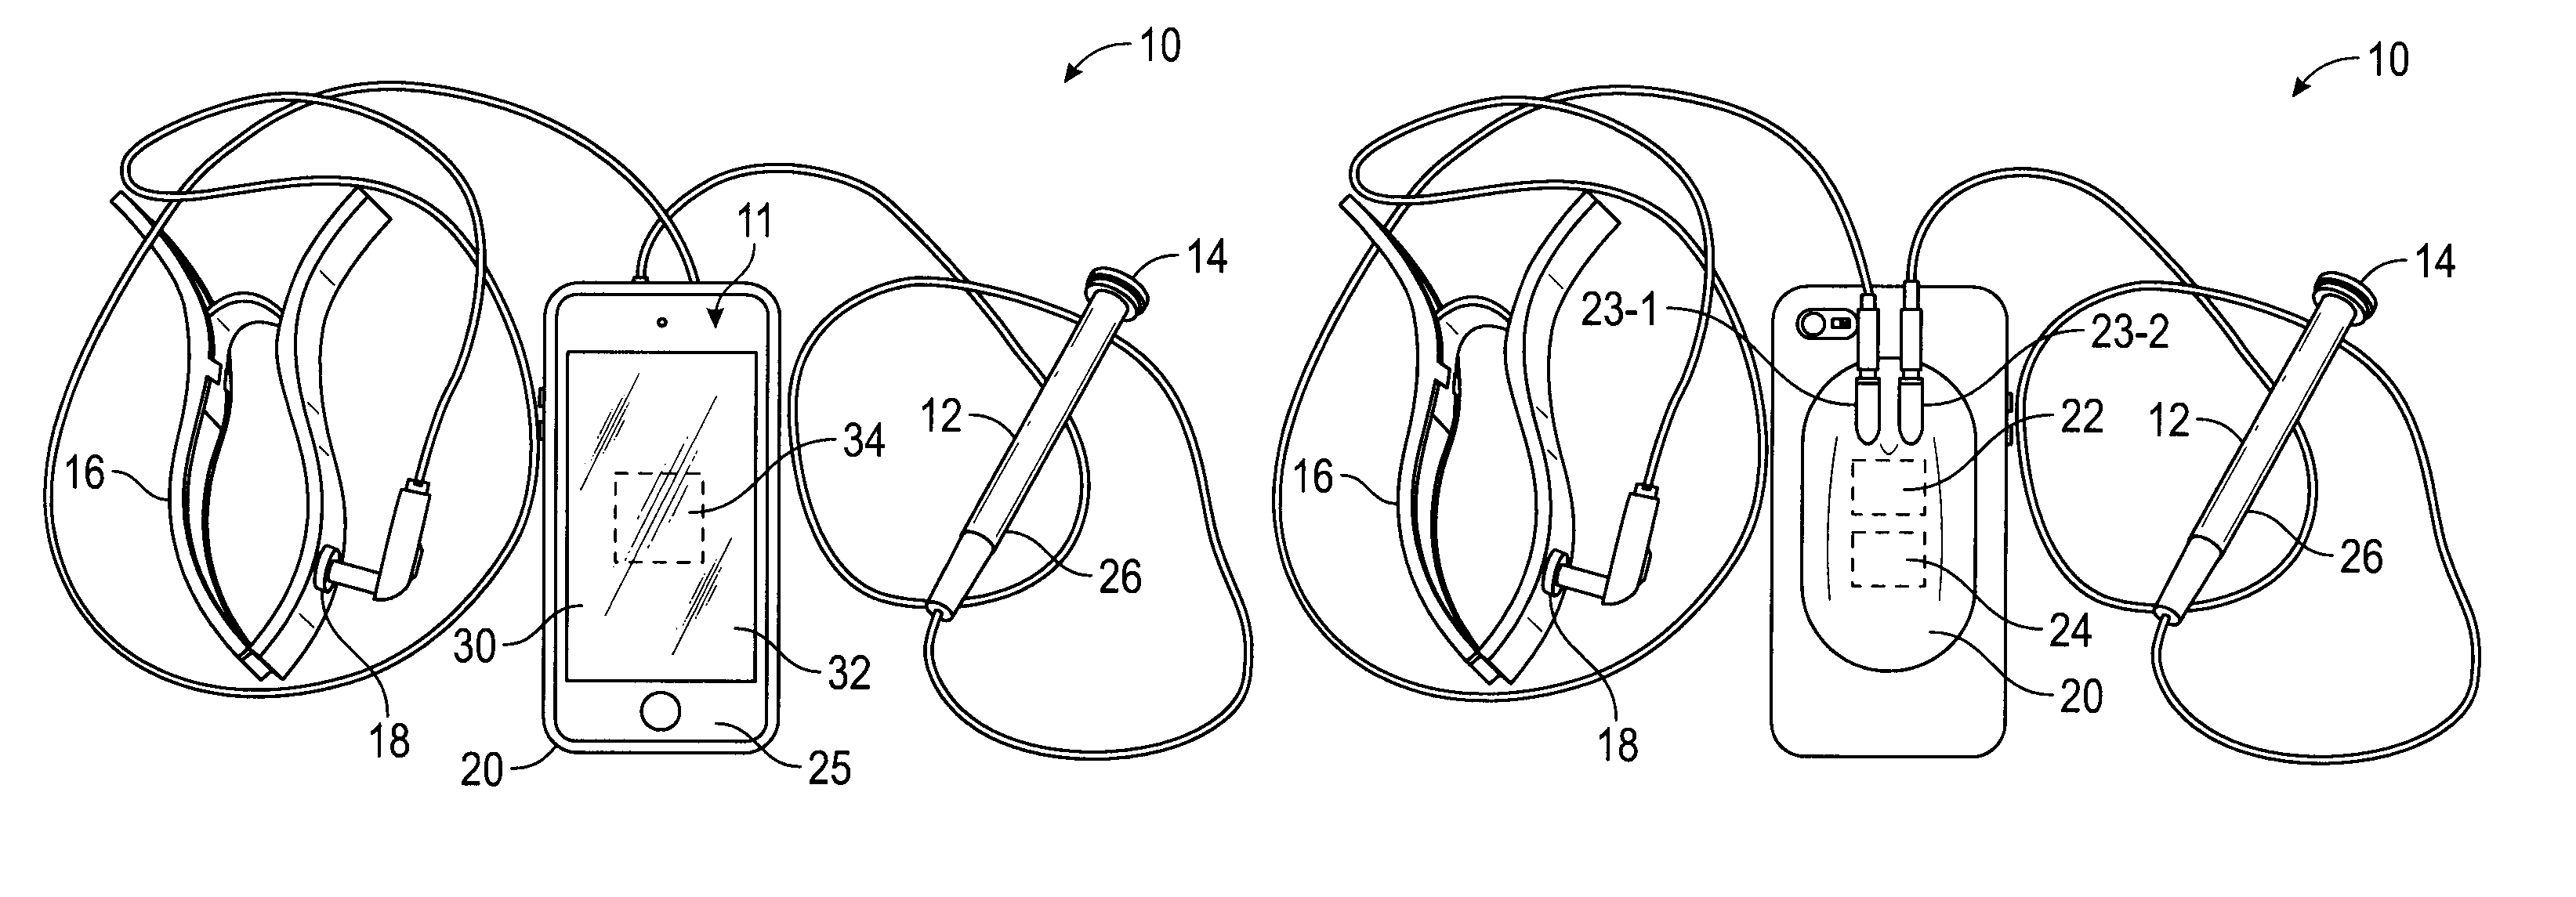 Two electrode apparatus and methods for twelve lead ECG